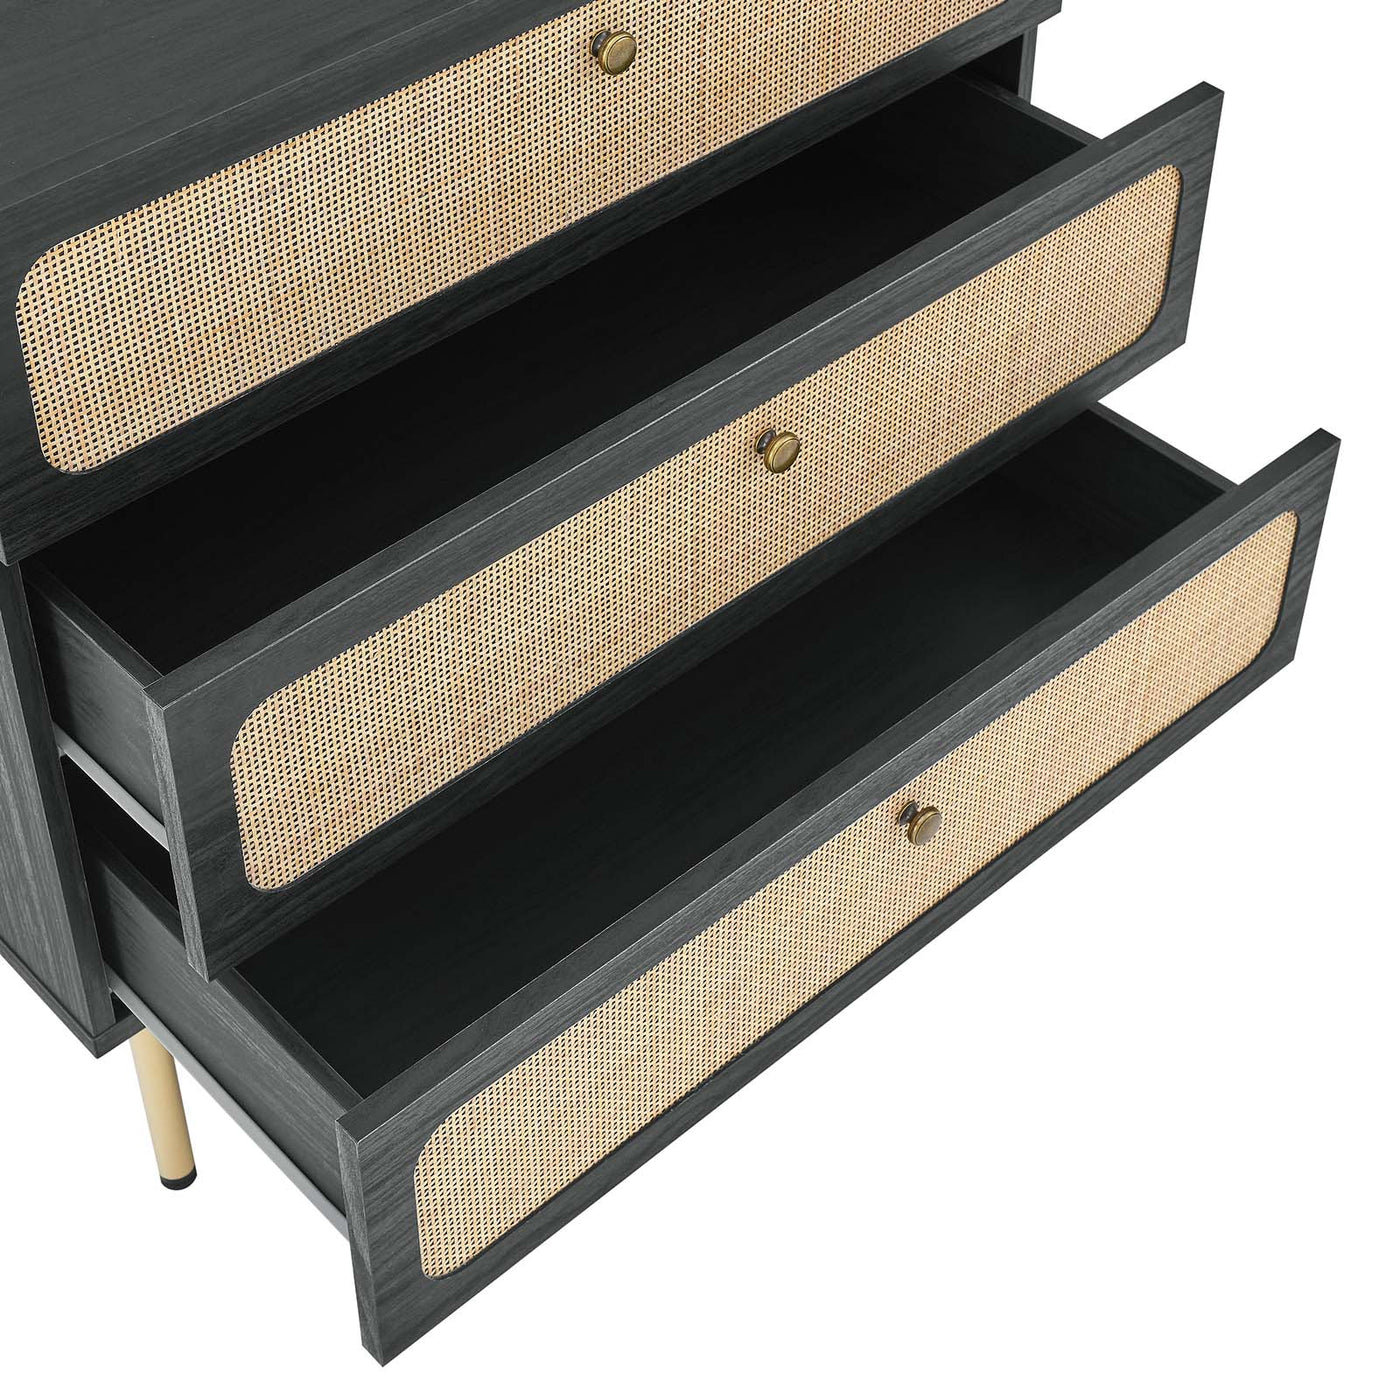 Chaucer 3-Drawer Chest